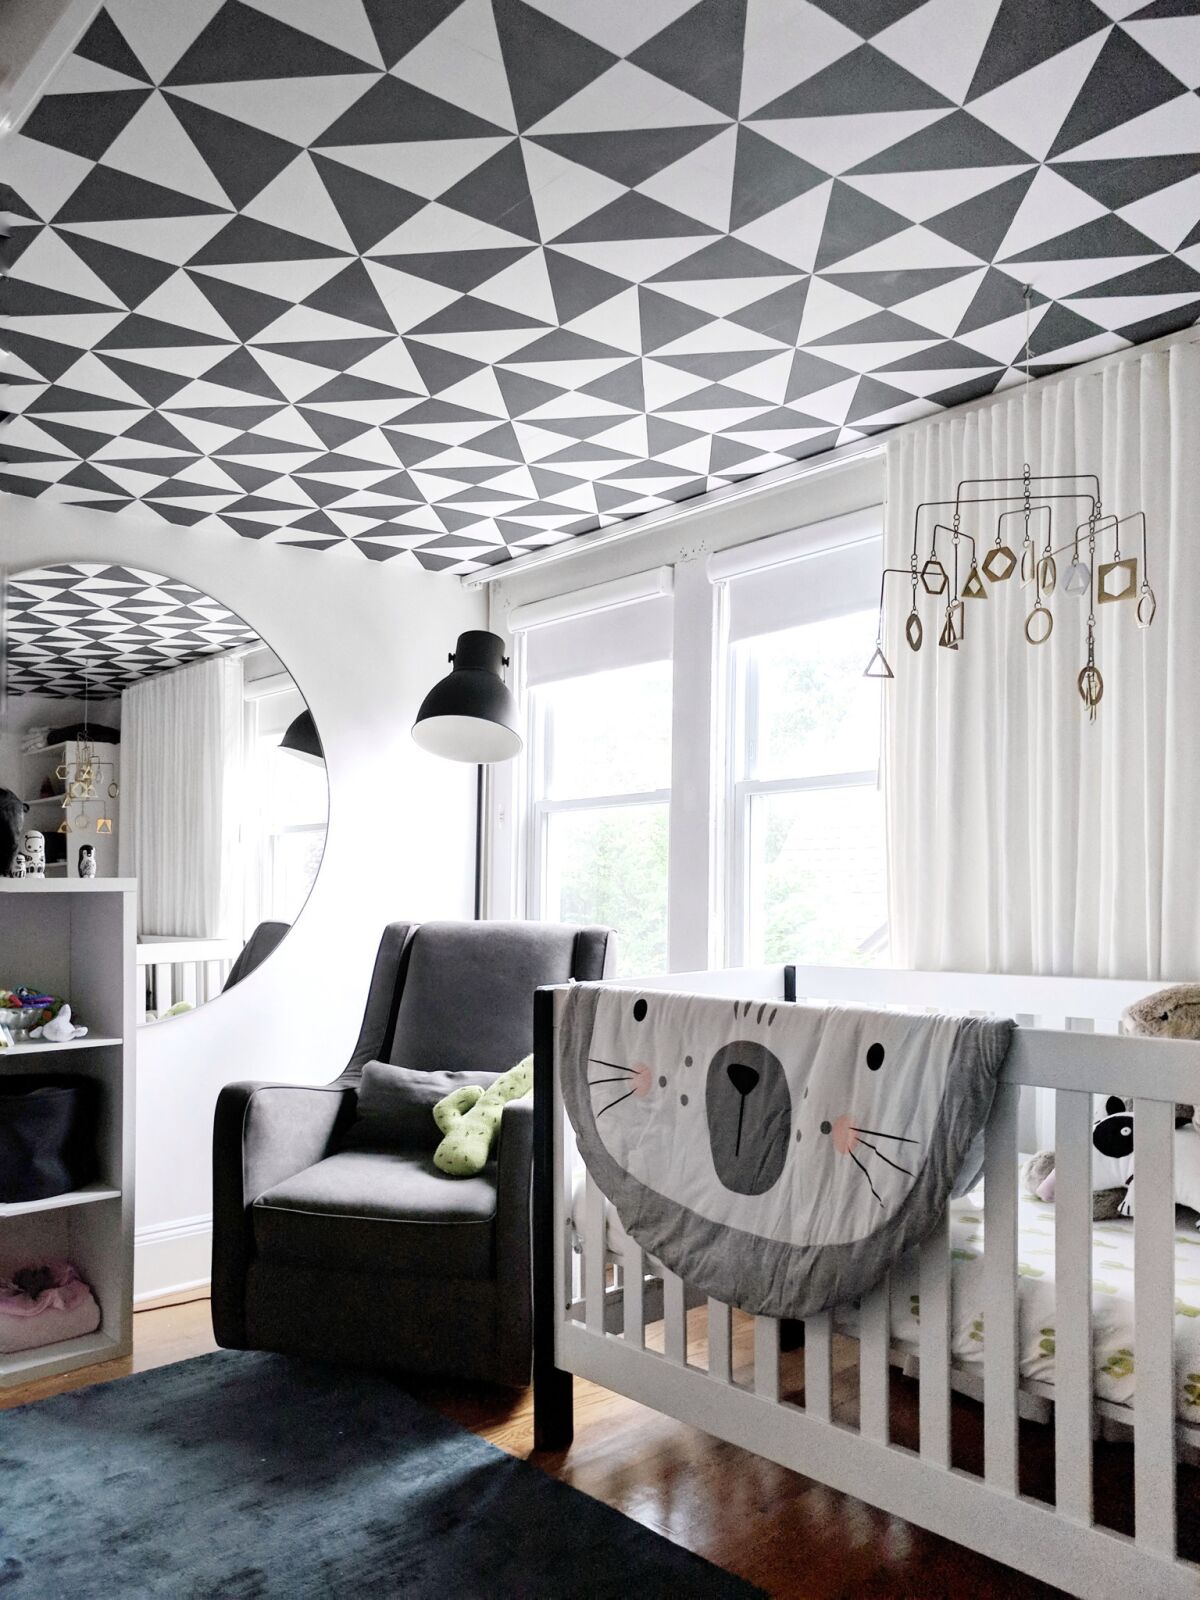 Designer Crystal Sinclair used graphic wallpaper by Chasing Paper on a nursery ceiling.